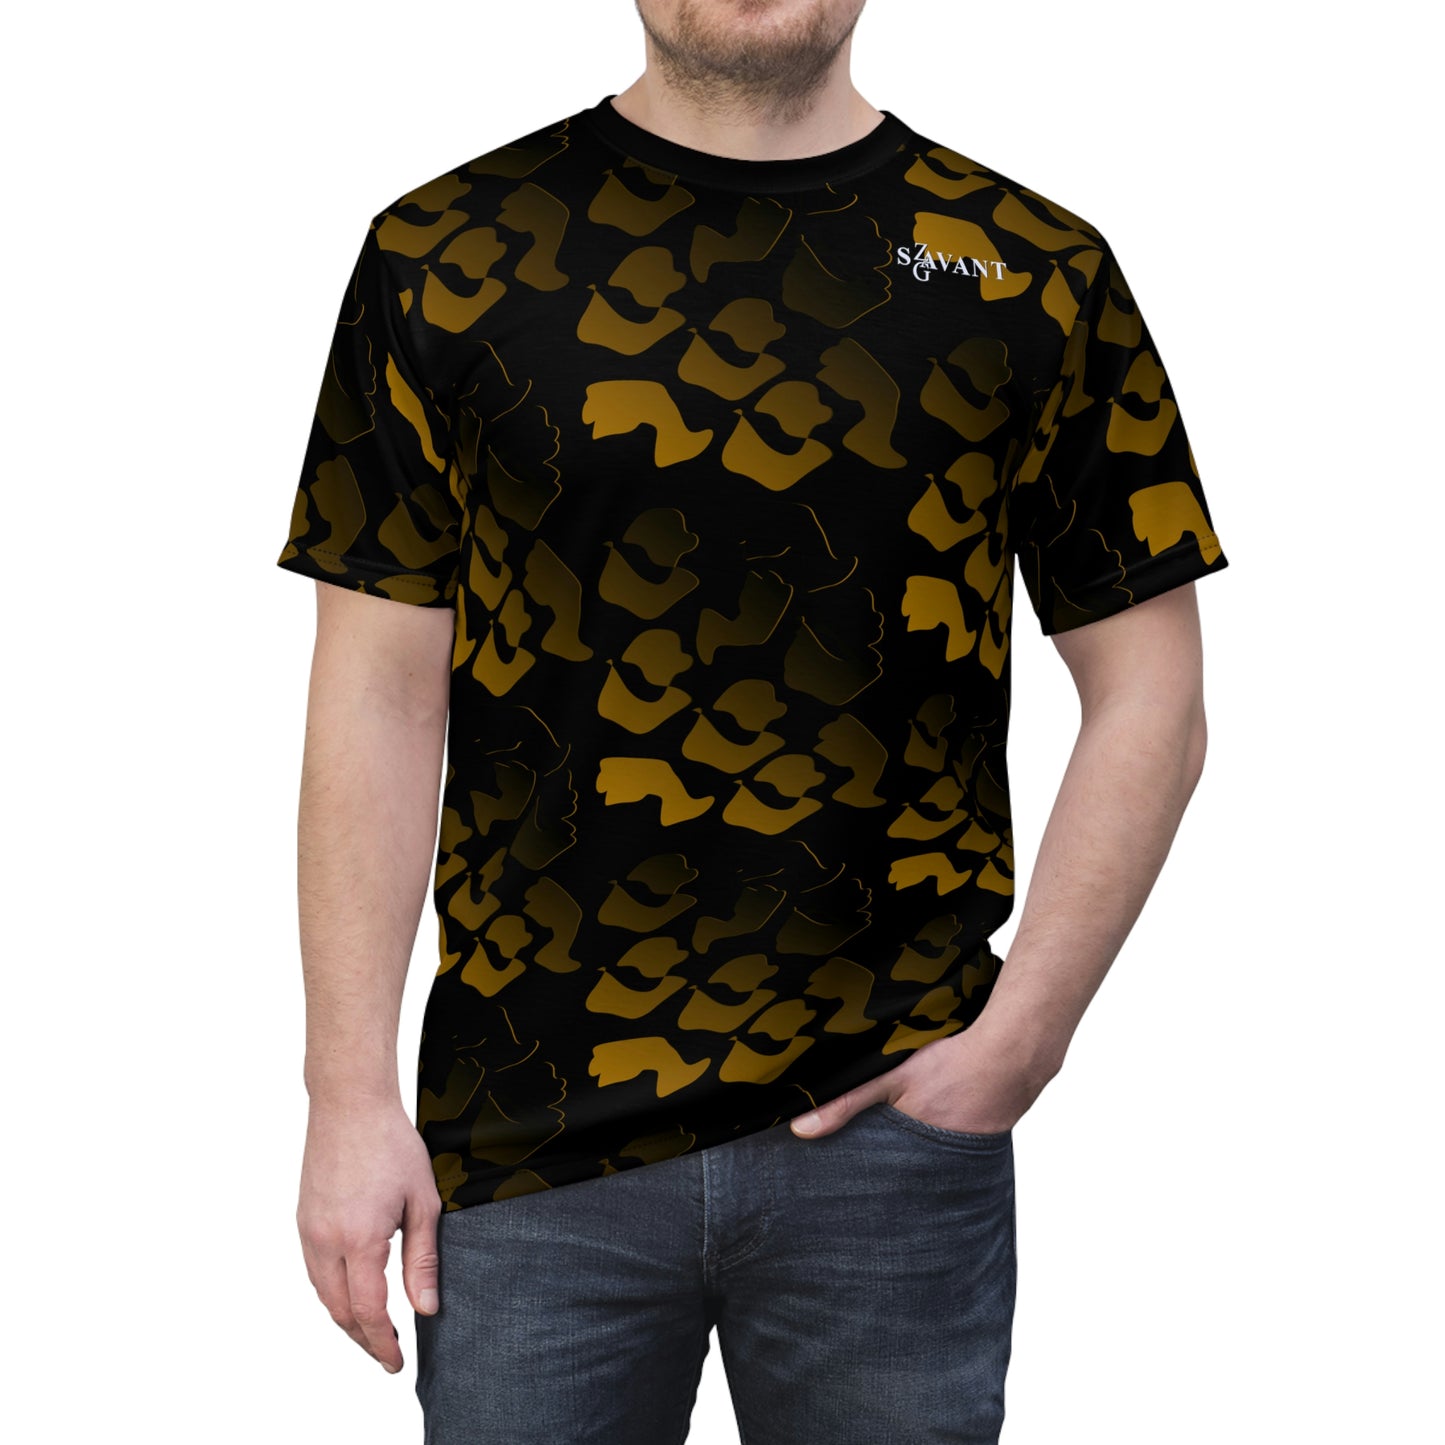 Cut & Sew Camouflage T-shirt - Black and Gold